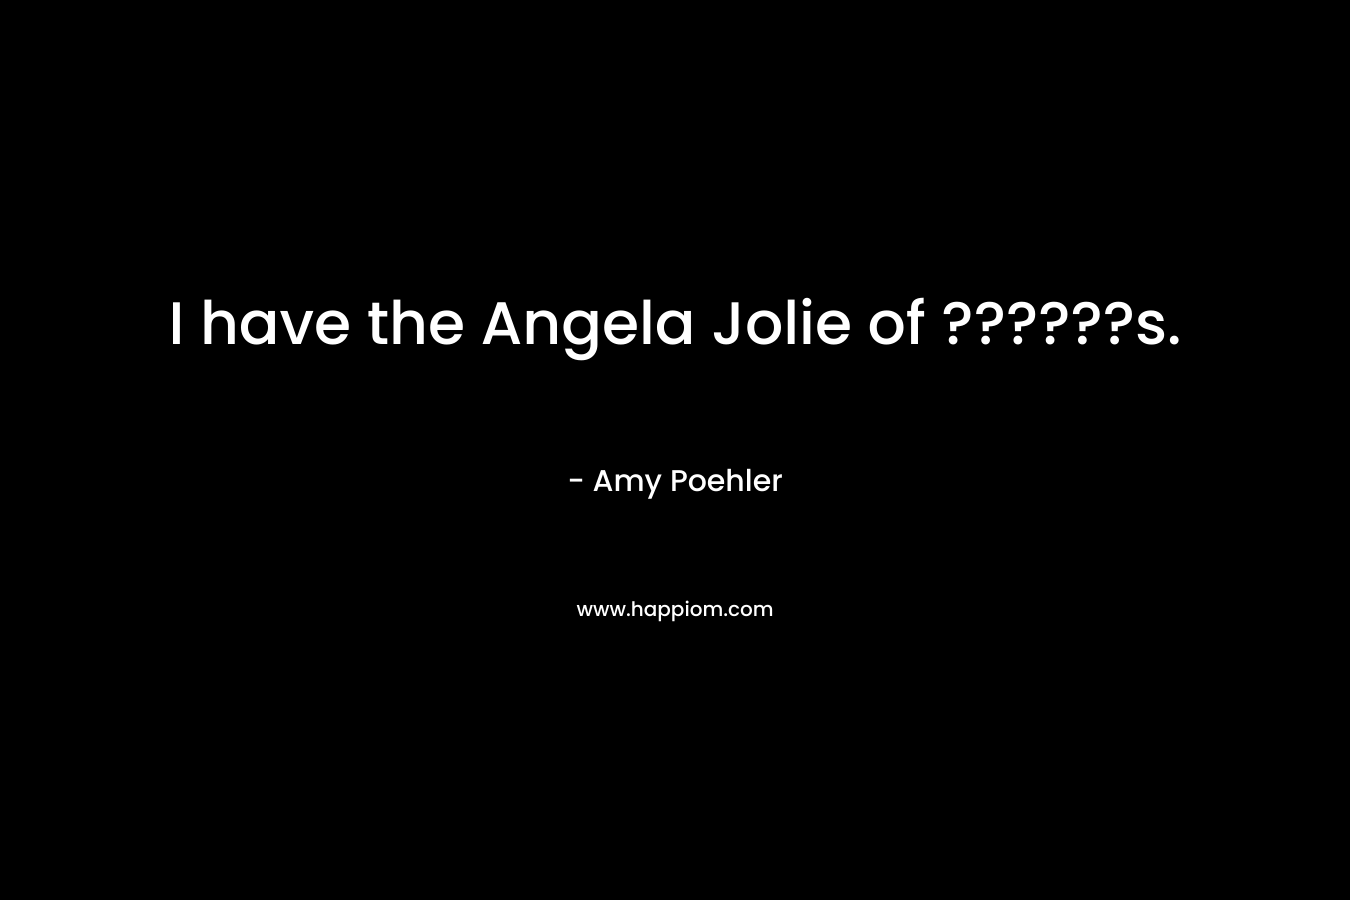 I have the Angela Jolie of ??????s.